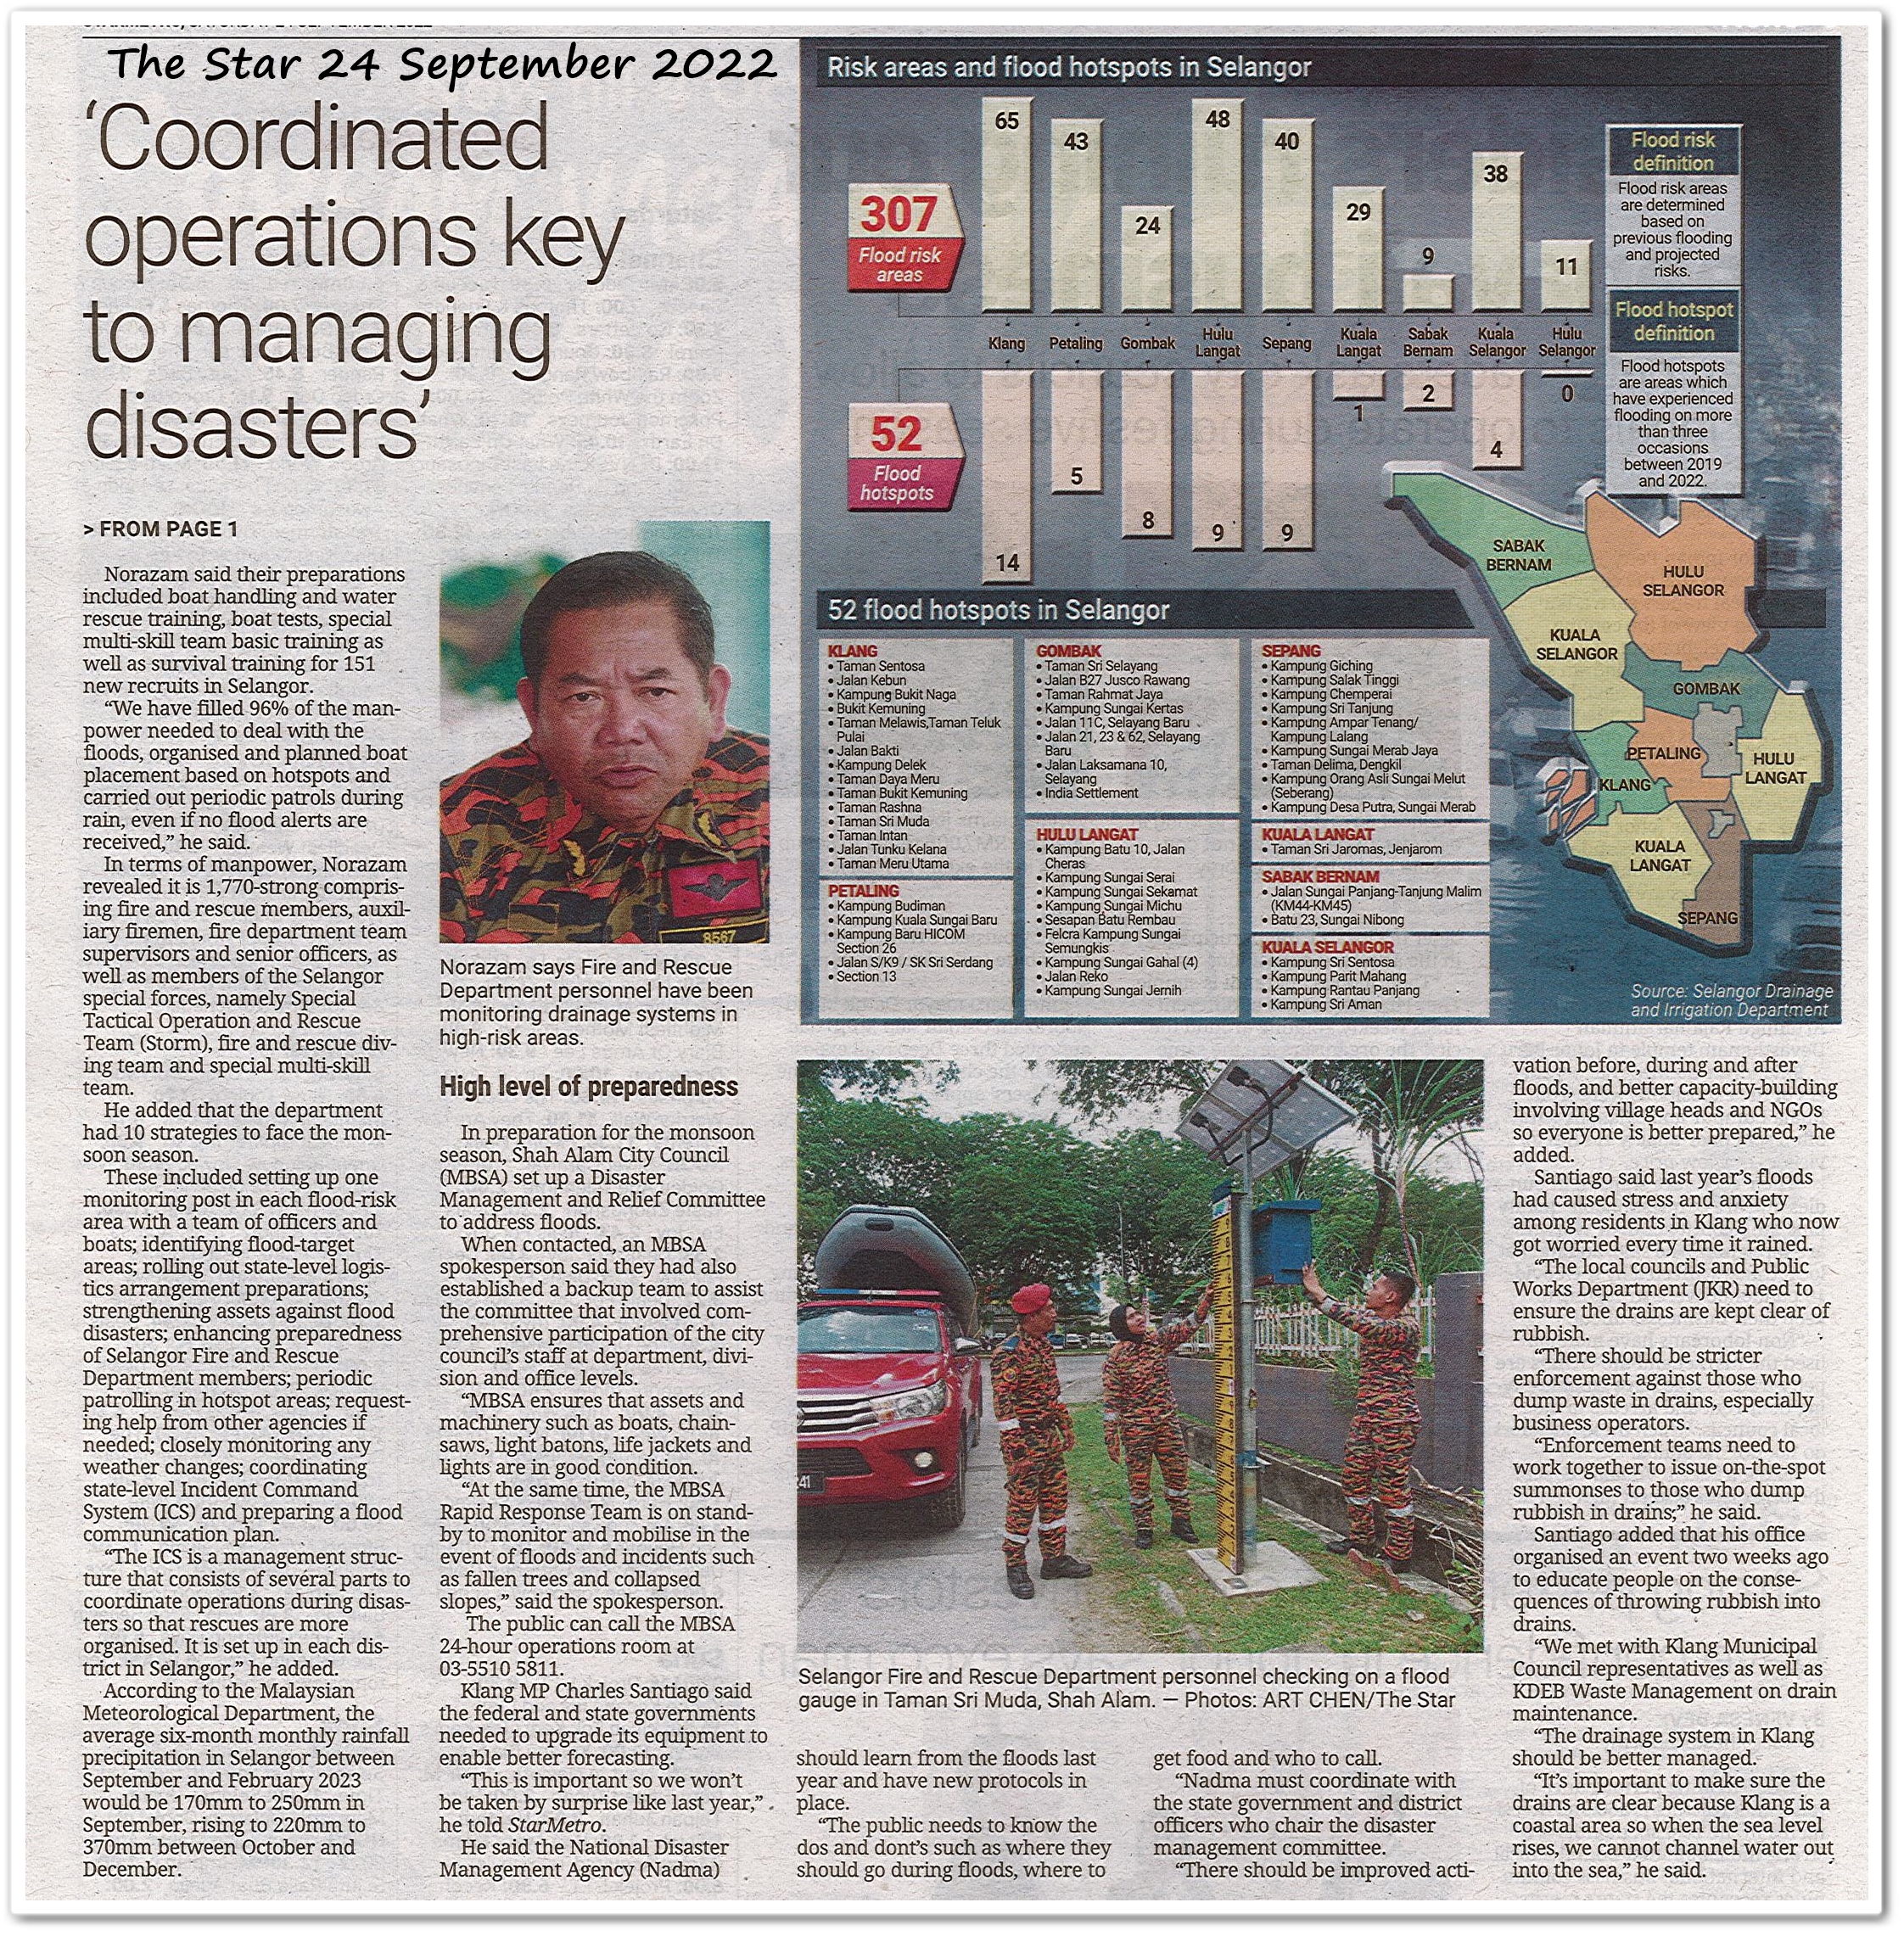 Facing floods full on ; Coordinated operations key to managing disasters ; Don't make us suffer again, say last year's flood victims - Keratan akhbar The Star 24 September 2022